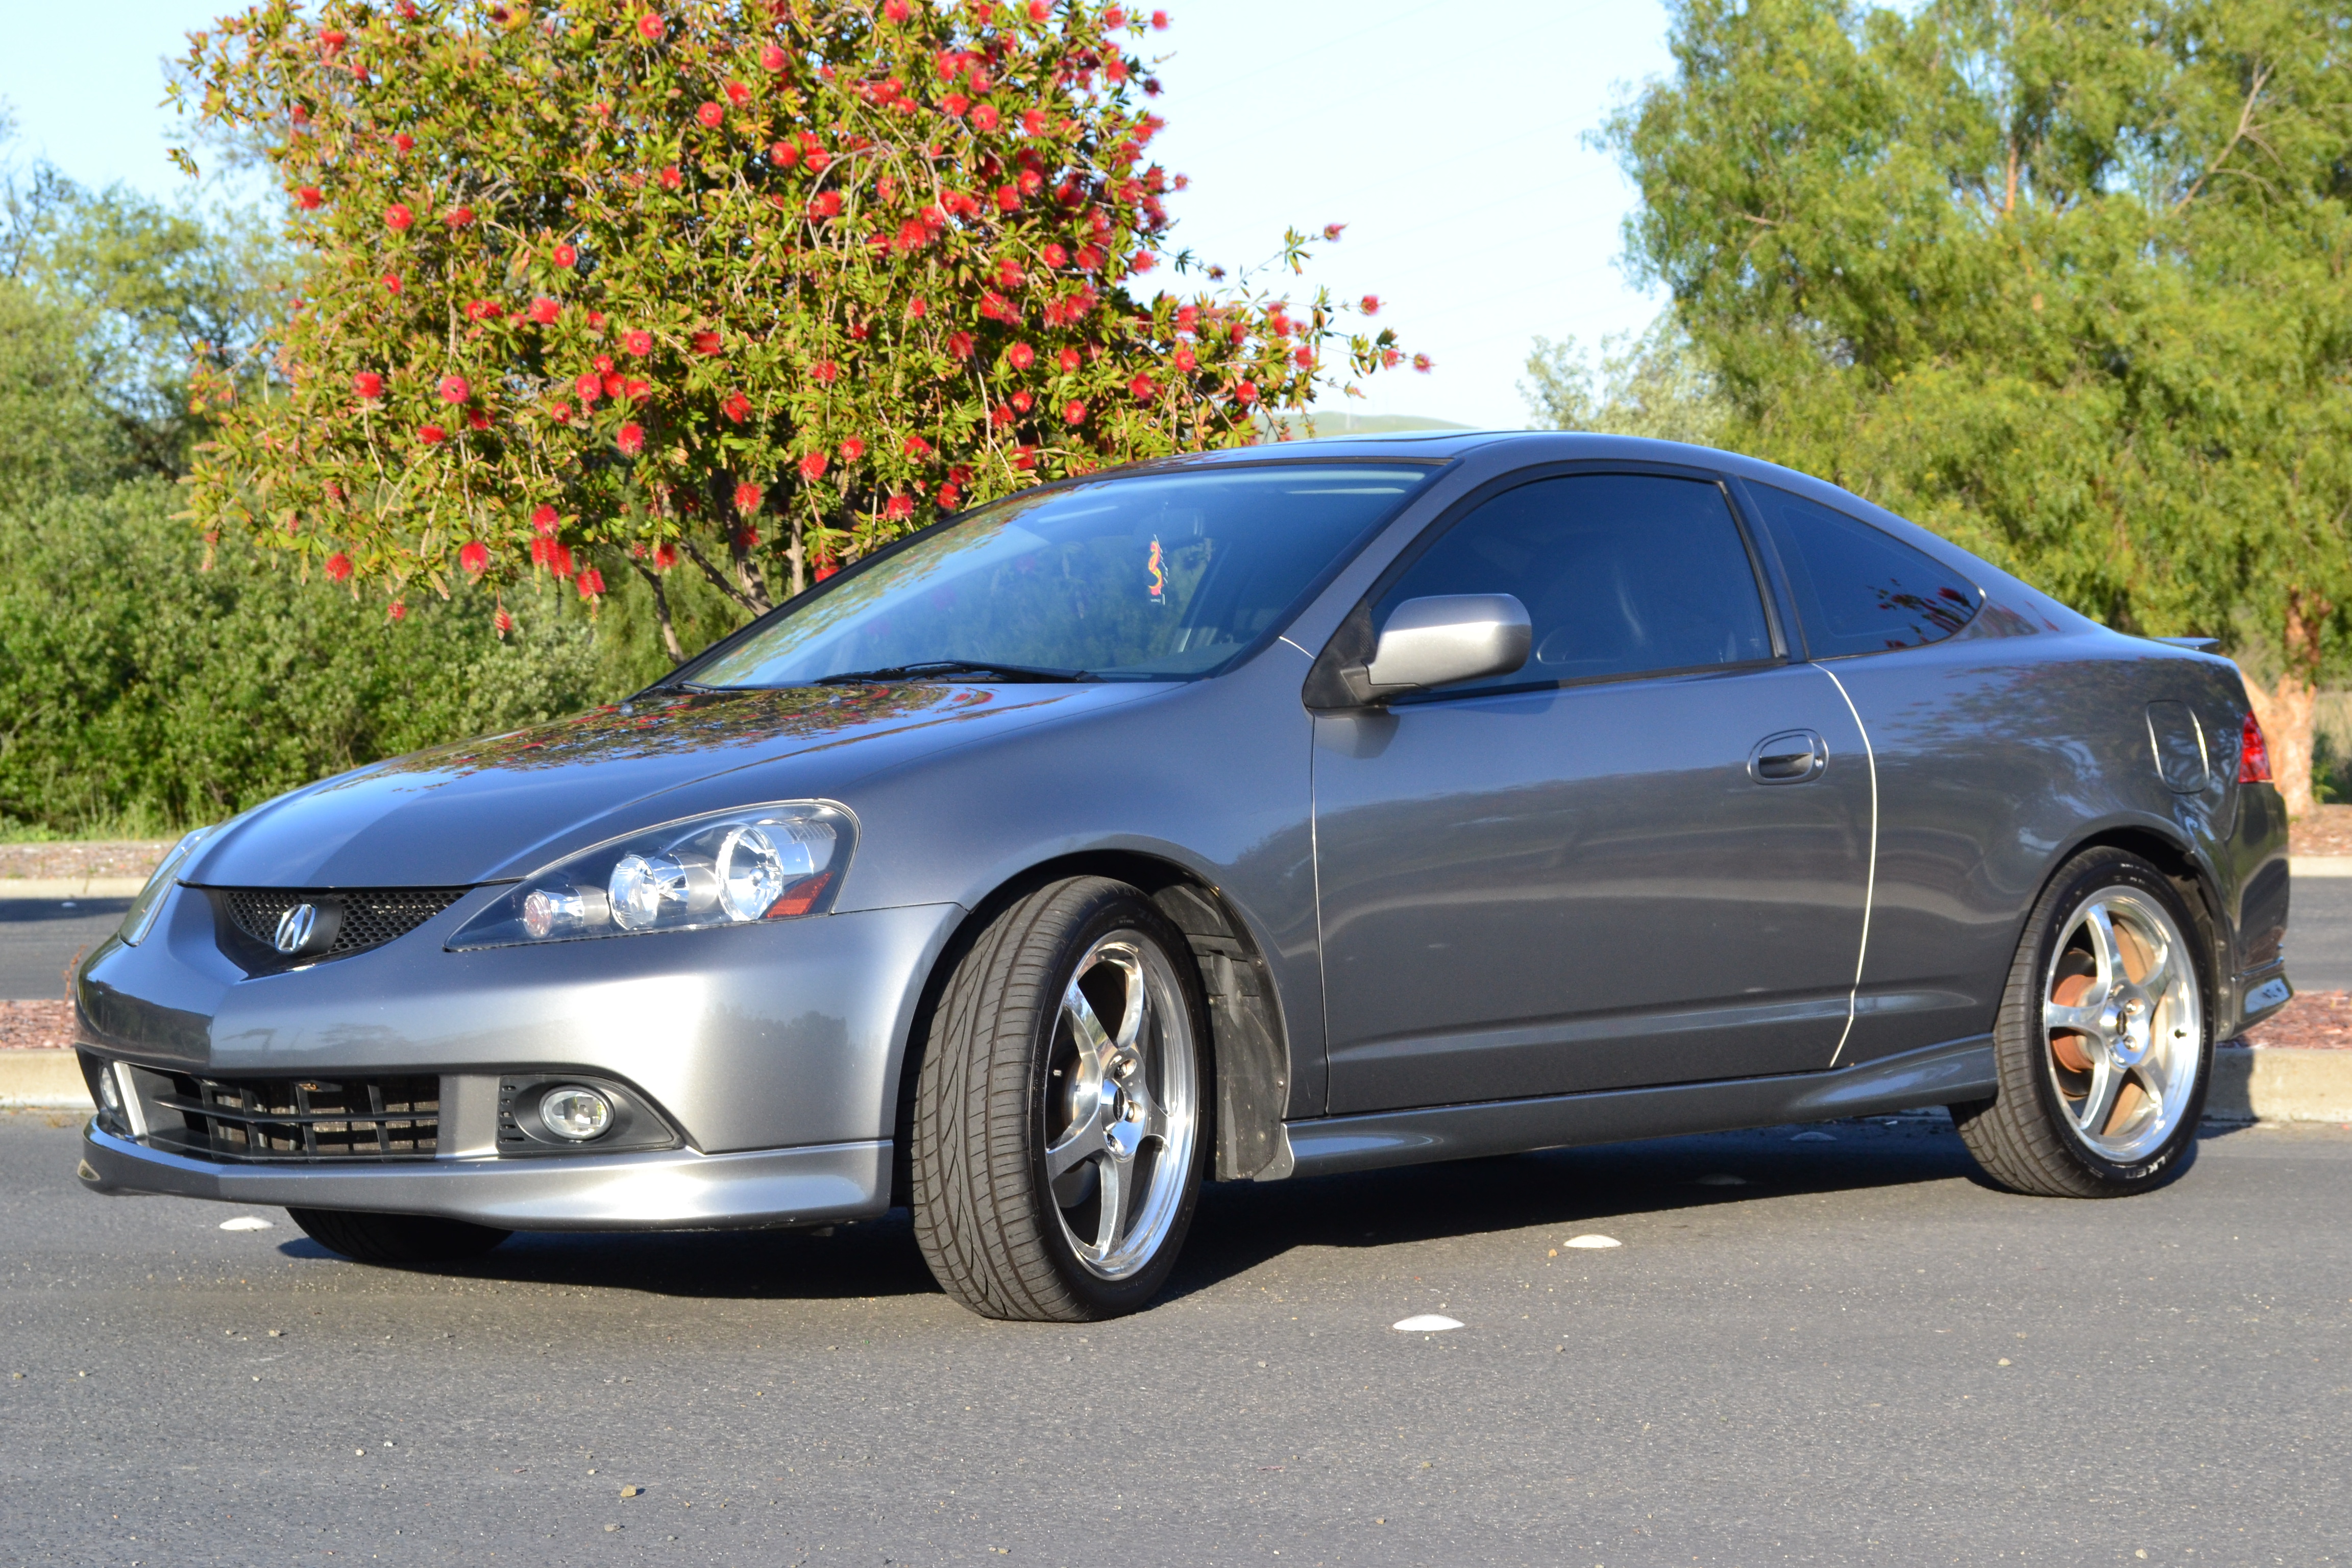 Sweet 2006 RSX Type-S for sale.